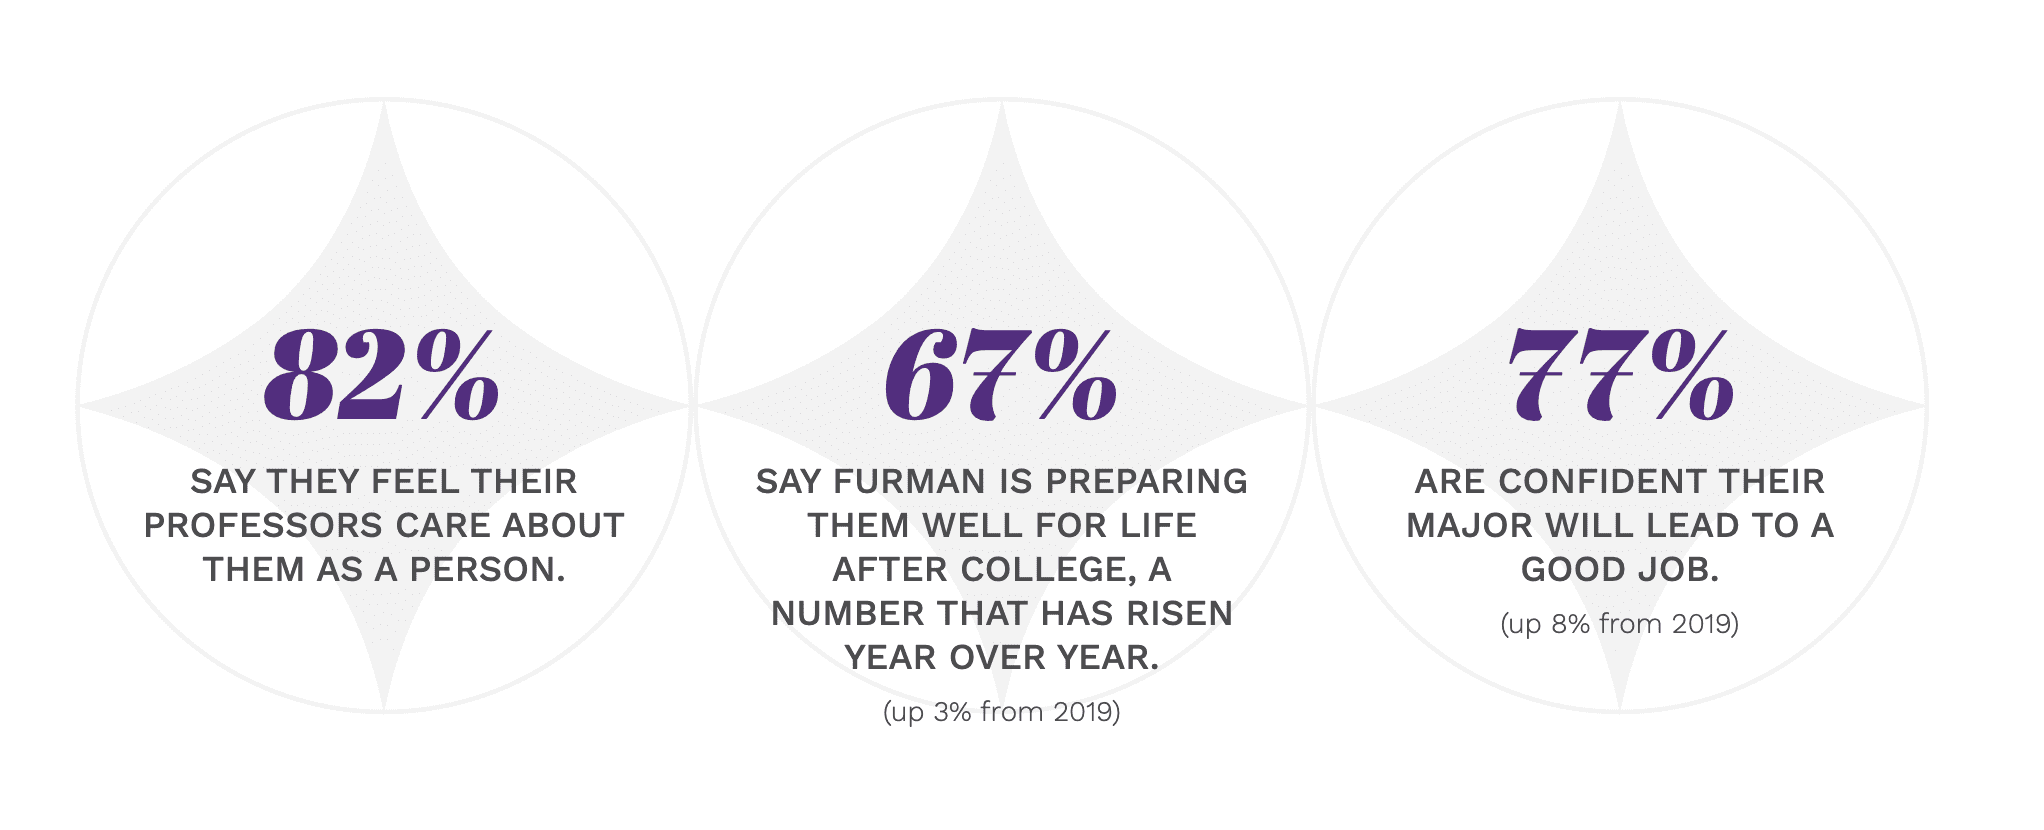 82% say they feel their professors care about them as a person. 67% say Furman is preparing them well for life after college, a number that has risen year over year. (up 3% from 2019) 77% are confident their major will lead to a good job. (up 8% from 2019)